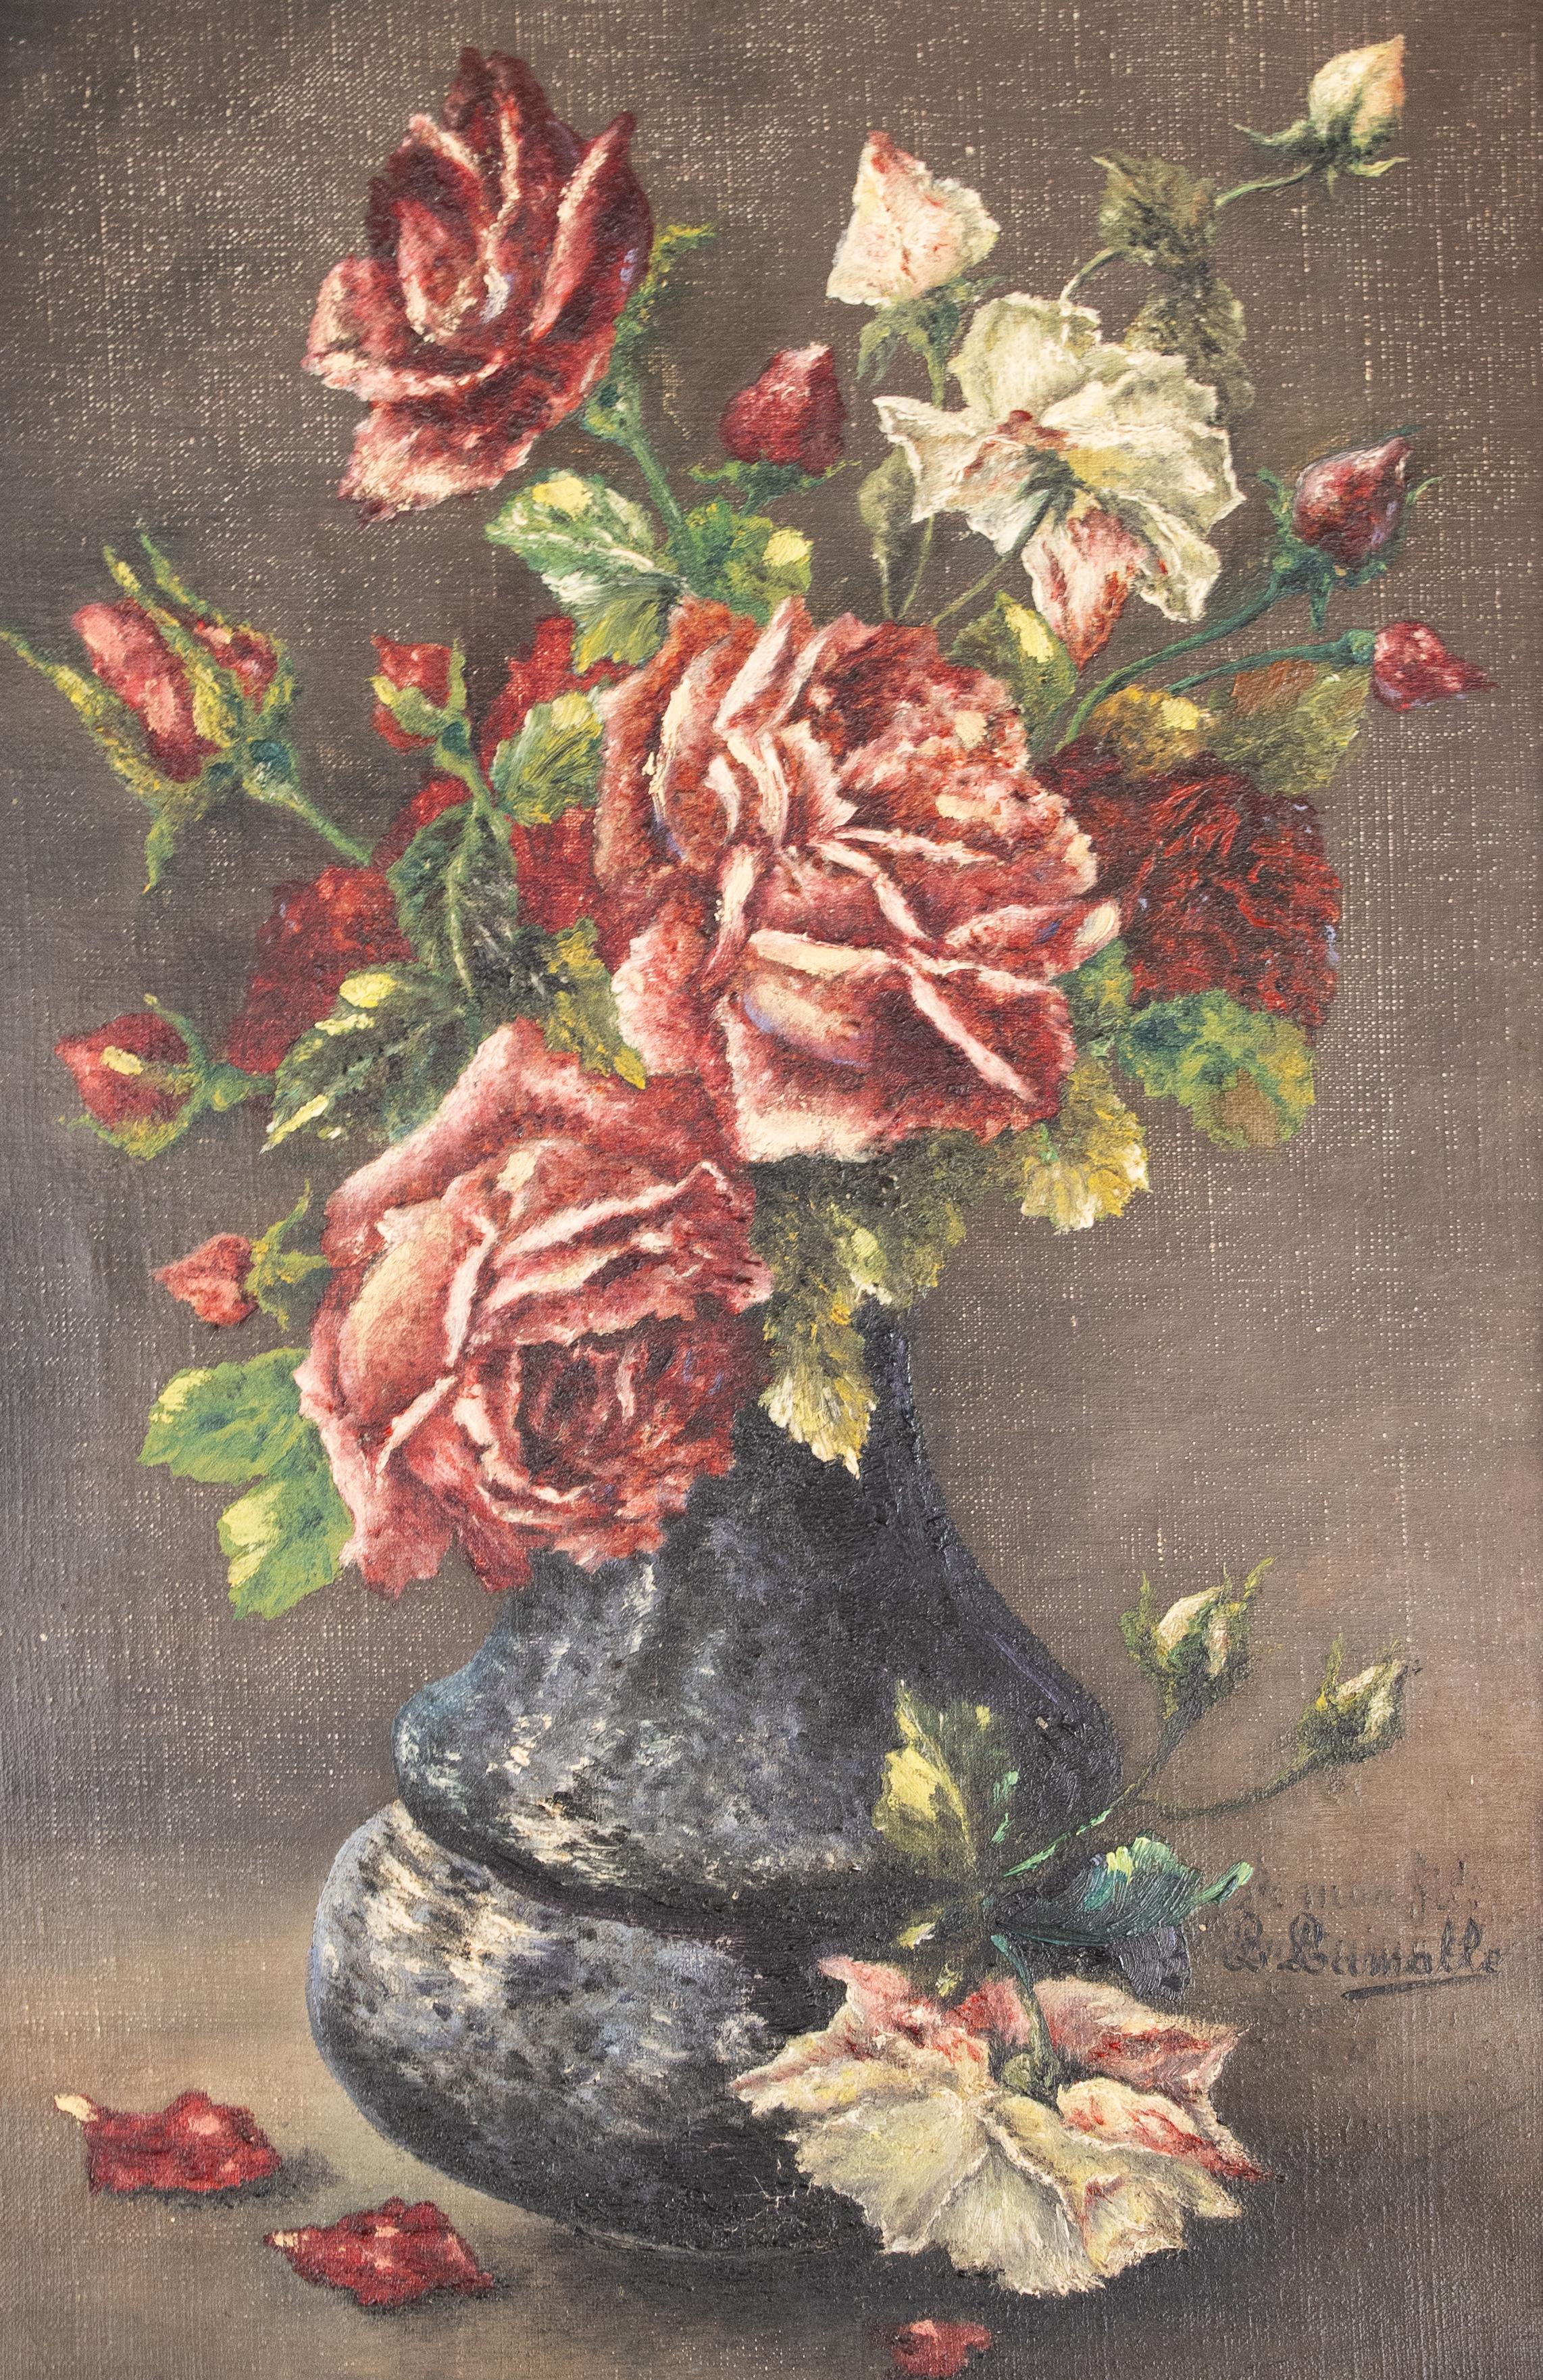 Wonderfully romantic still life oil on canvas featuring antique roses in crimson and pink. Some fully open, petals dropping below, others still in bud, set within a lobed blue and white vase. Displayed within an ornate gold gilt frame. Signature